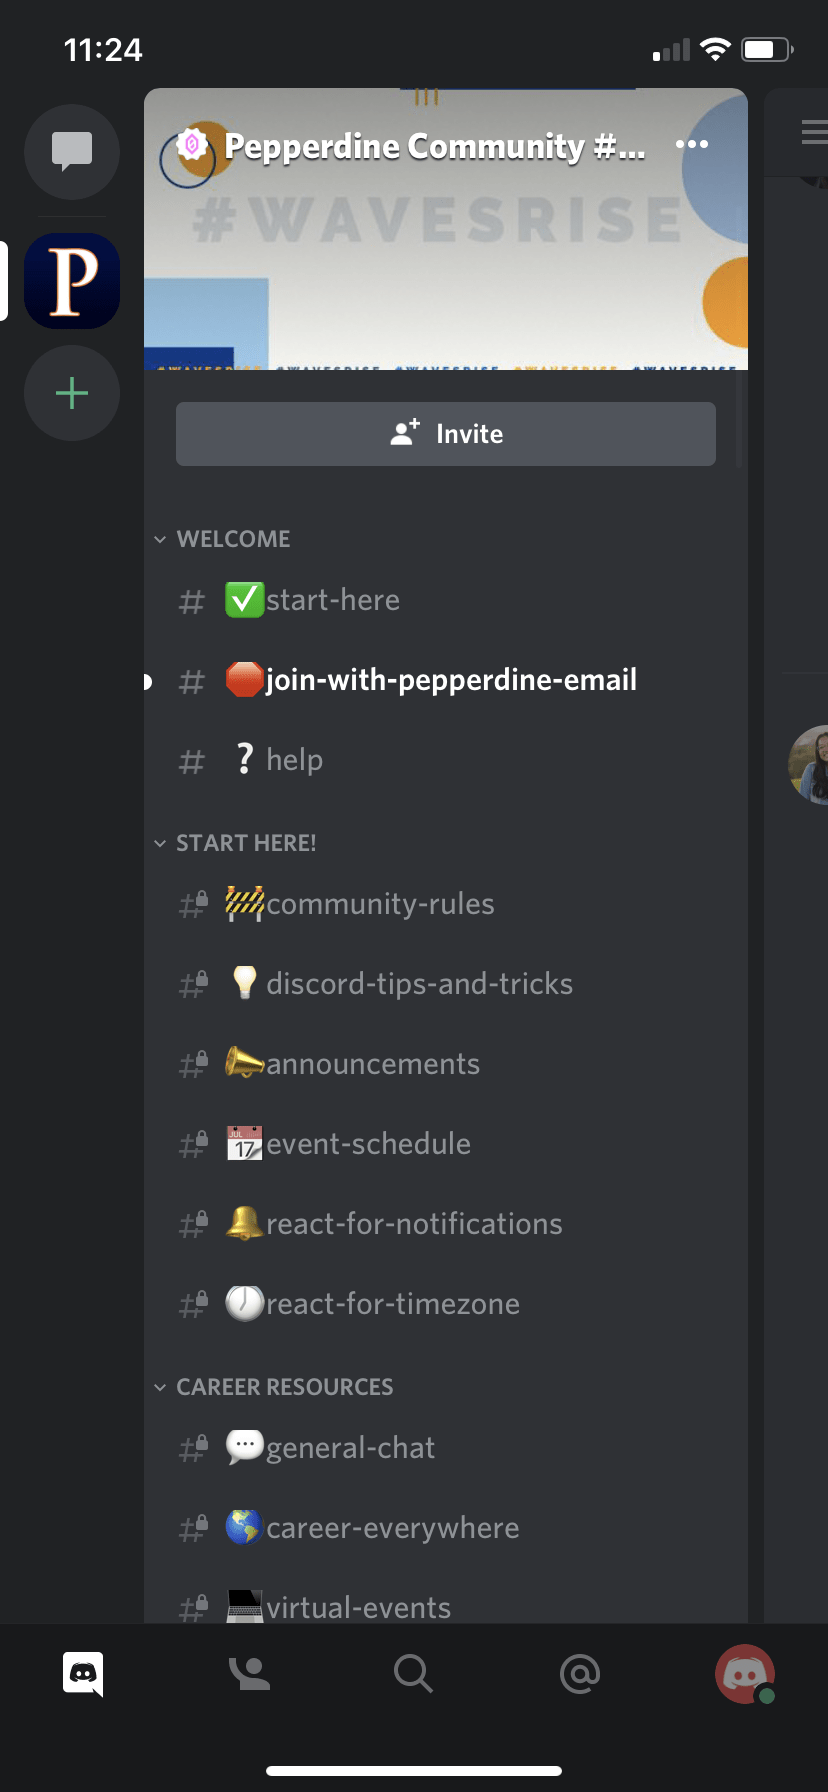 This screenshot of the Discord app shows its general layout and features. When students sign up, they will be guided through a "start here" page, which will then provide them access to the entire community&squot;s posts.